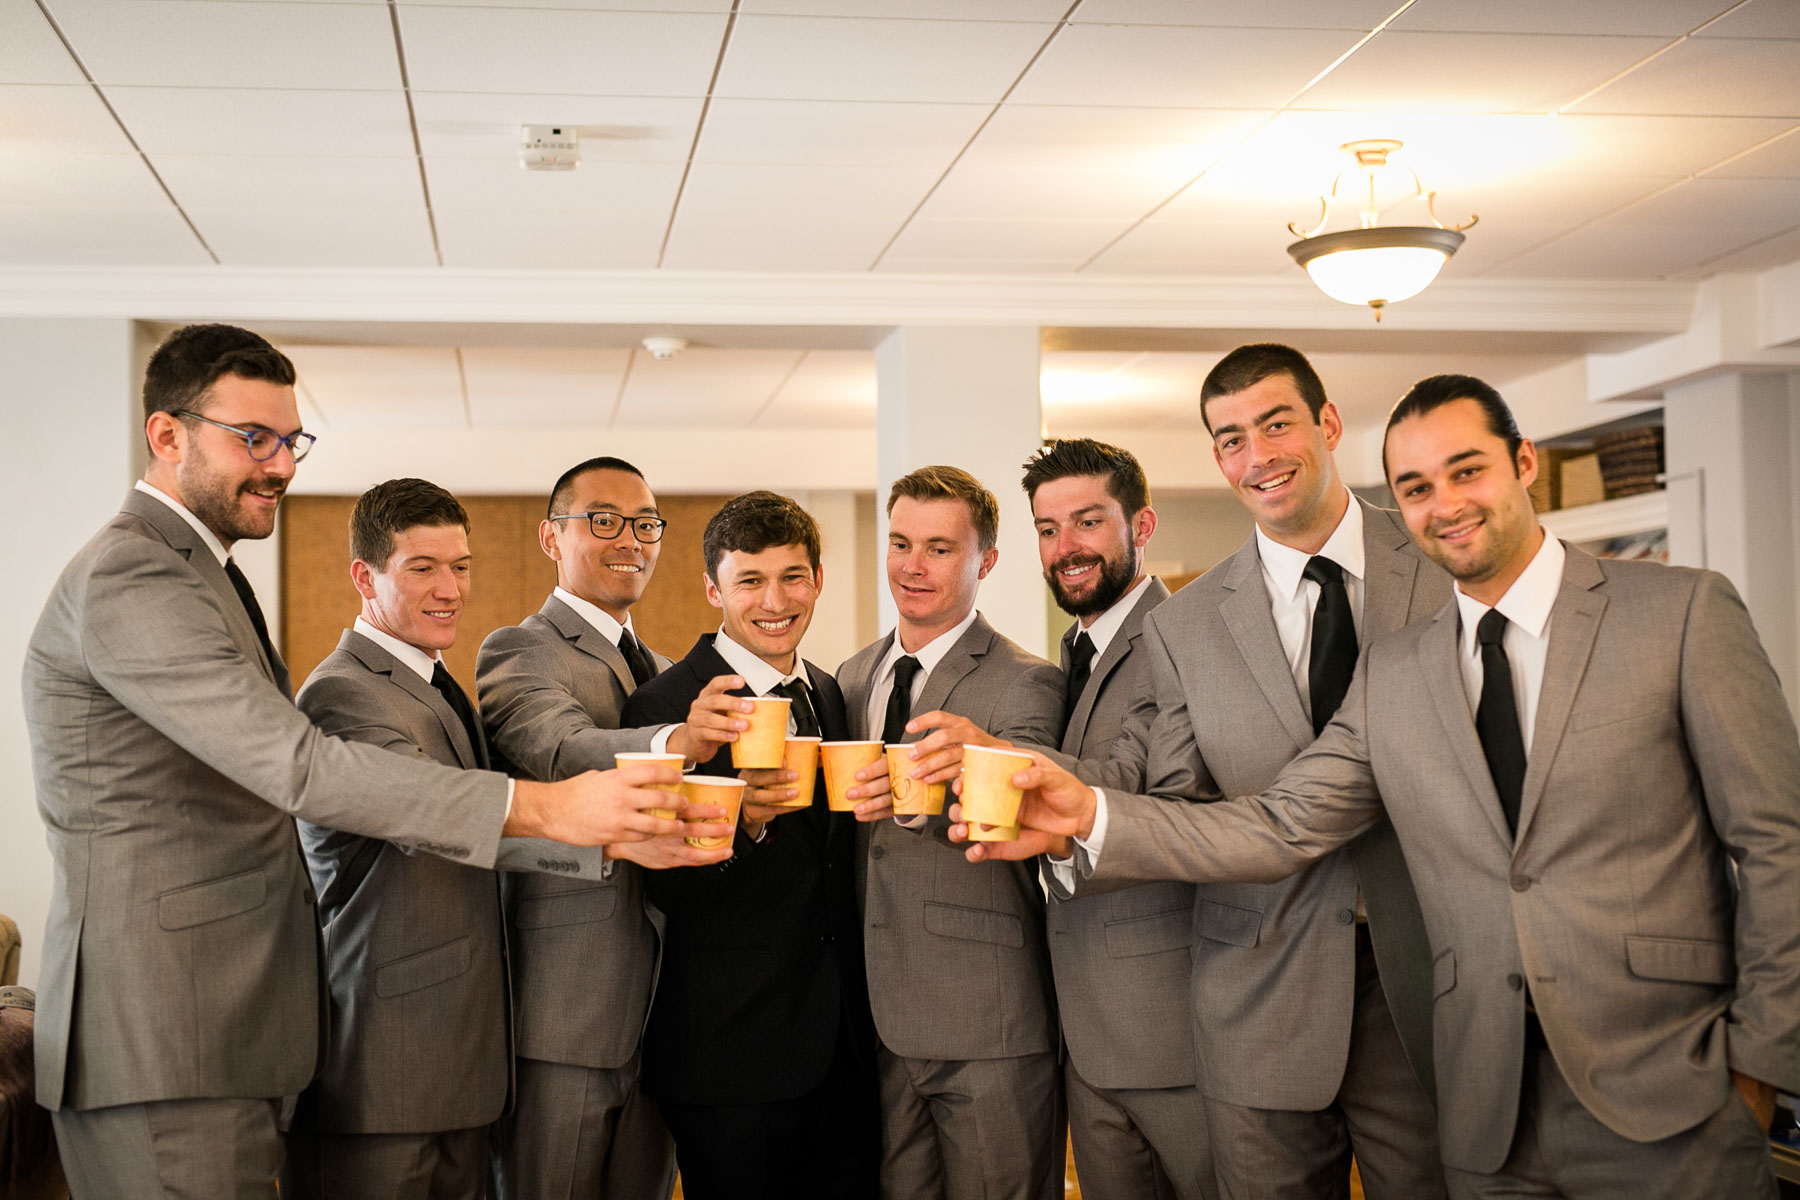 The_Connors_Center_Wedding_Dan_Aguirre_Photography_027